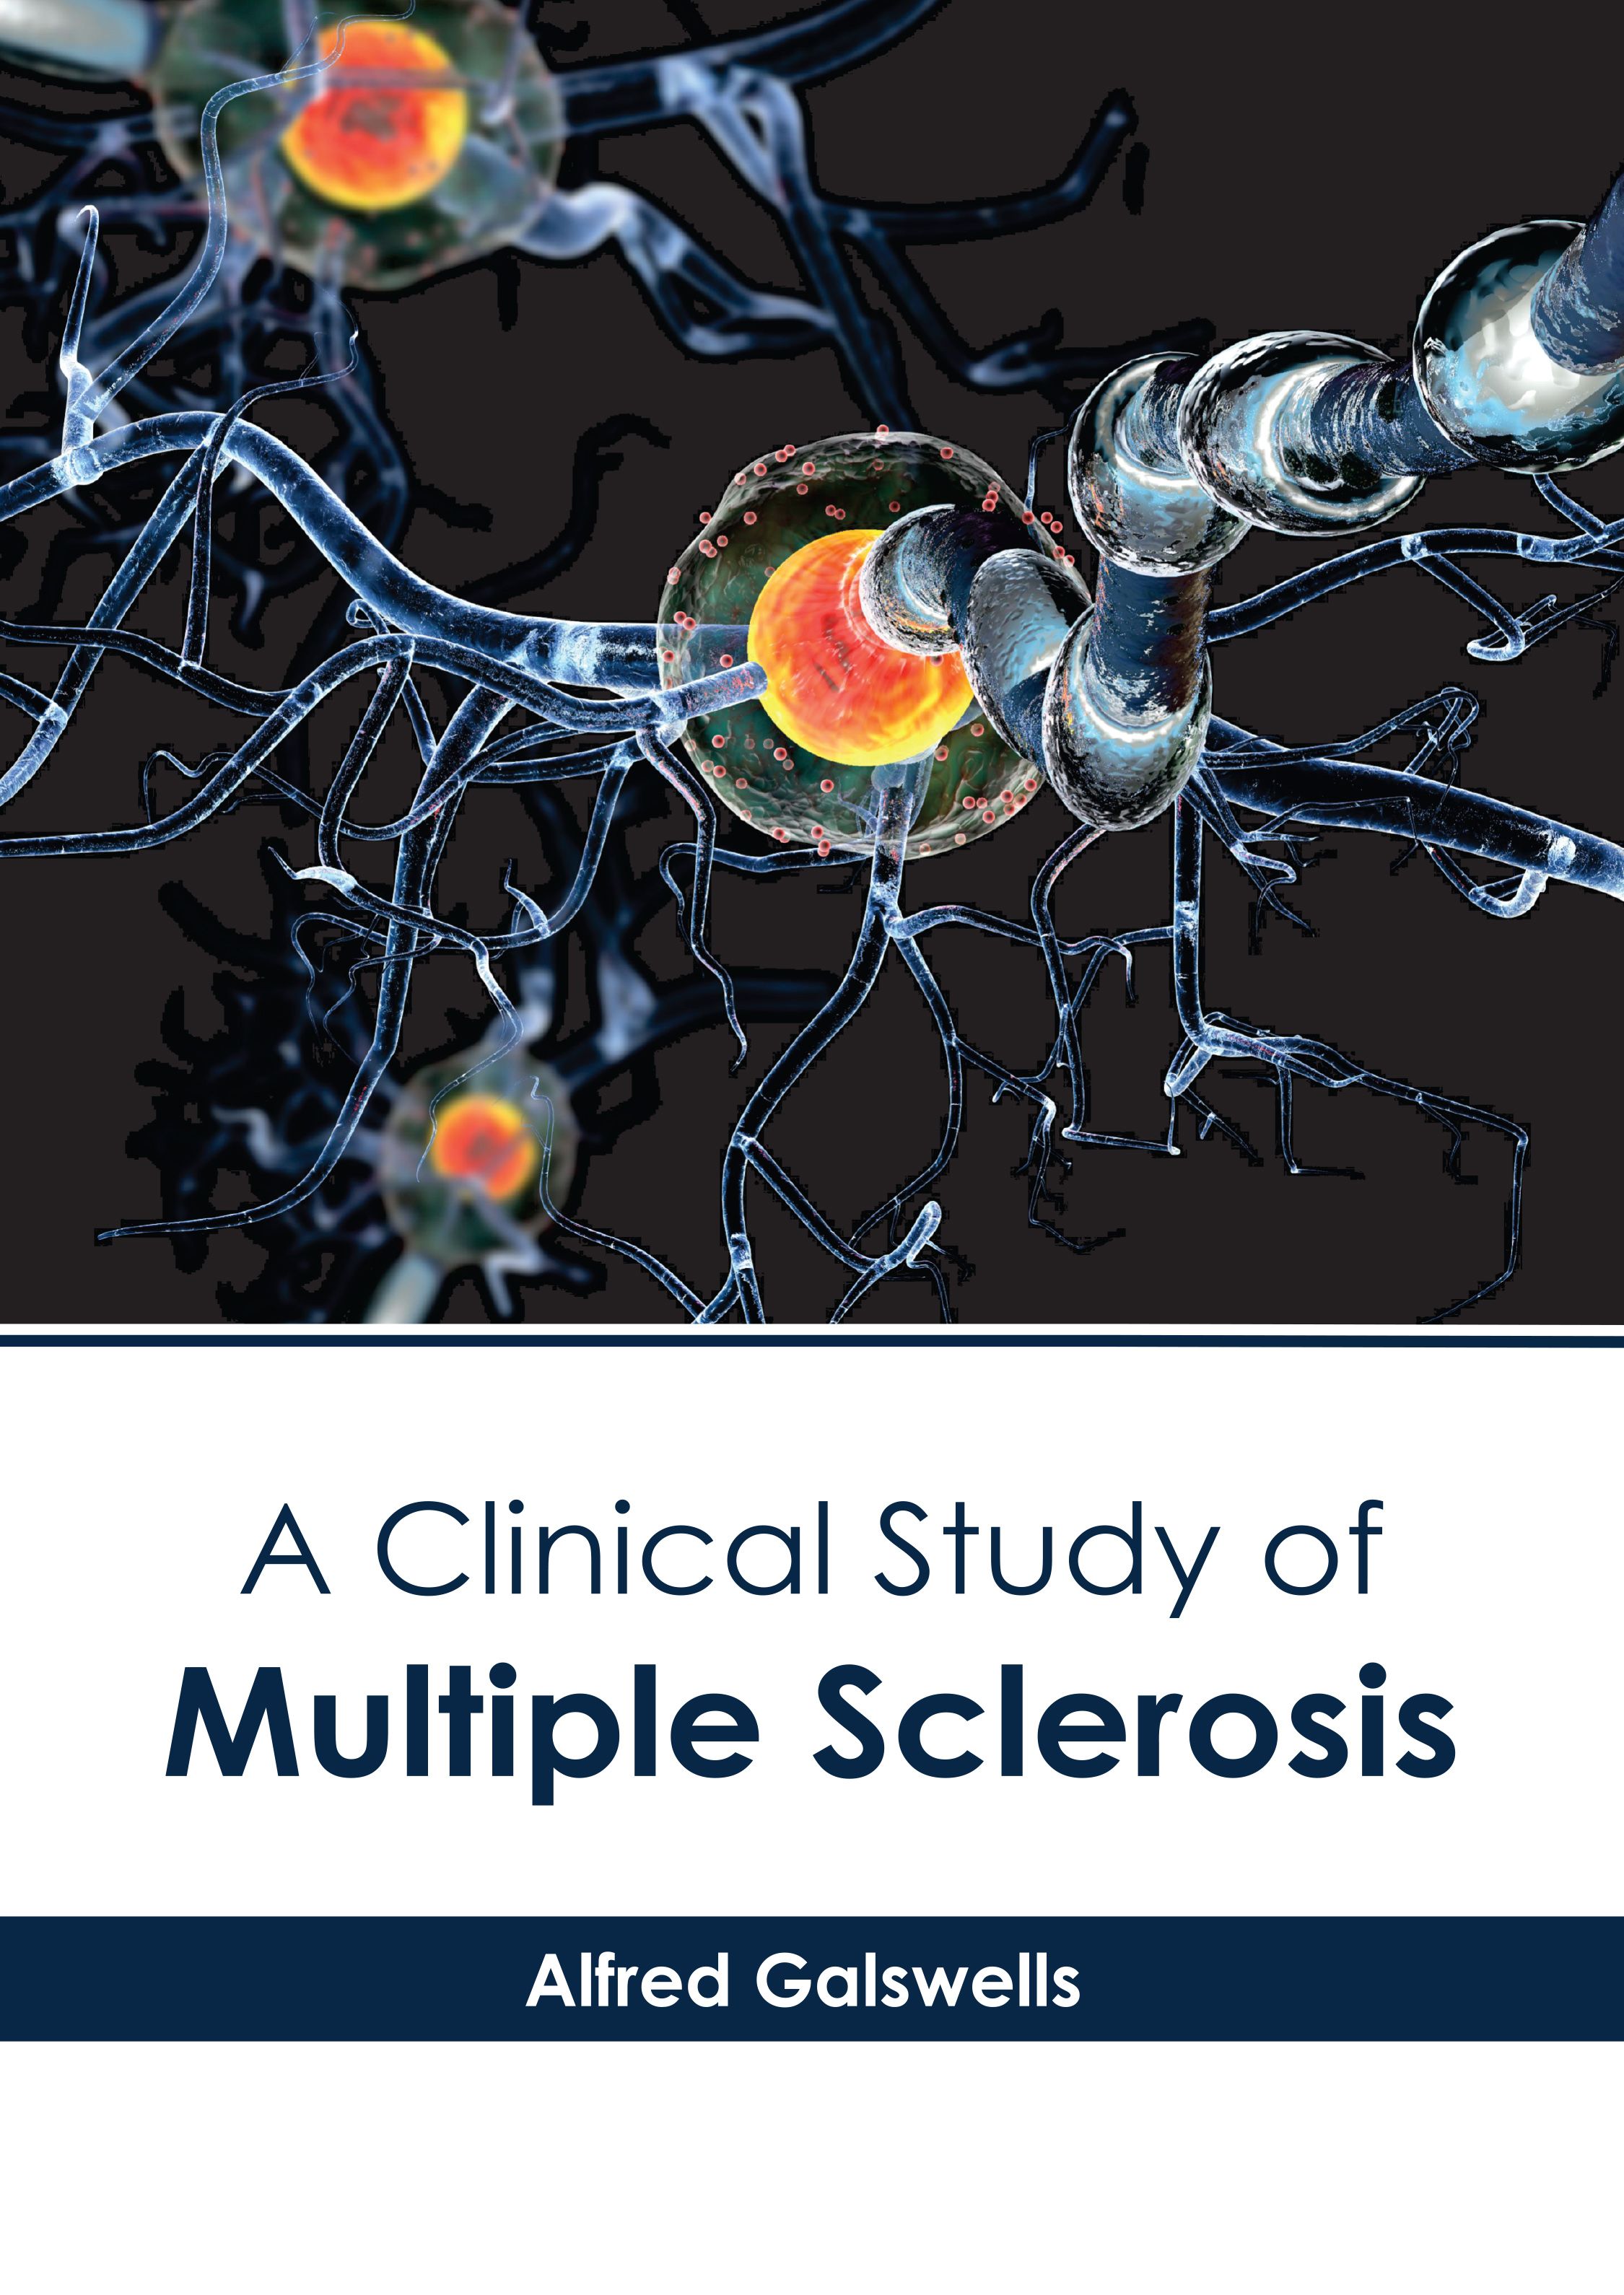 A CLINICAL STUDY OF MULTIPLE SCLEROSIS